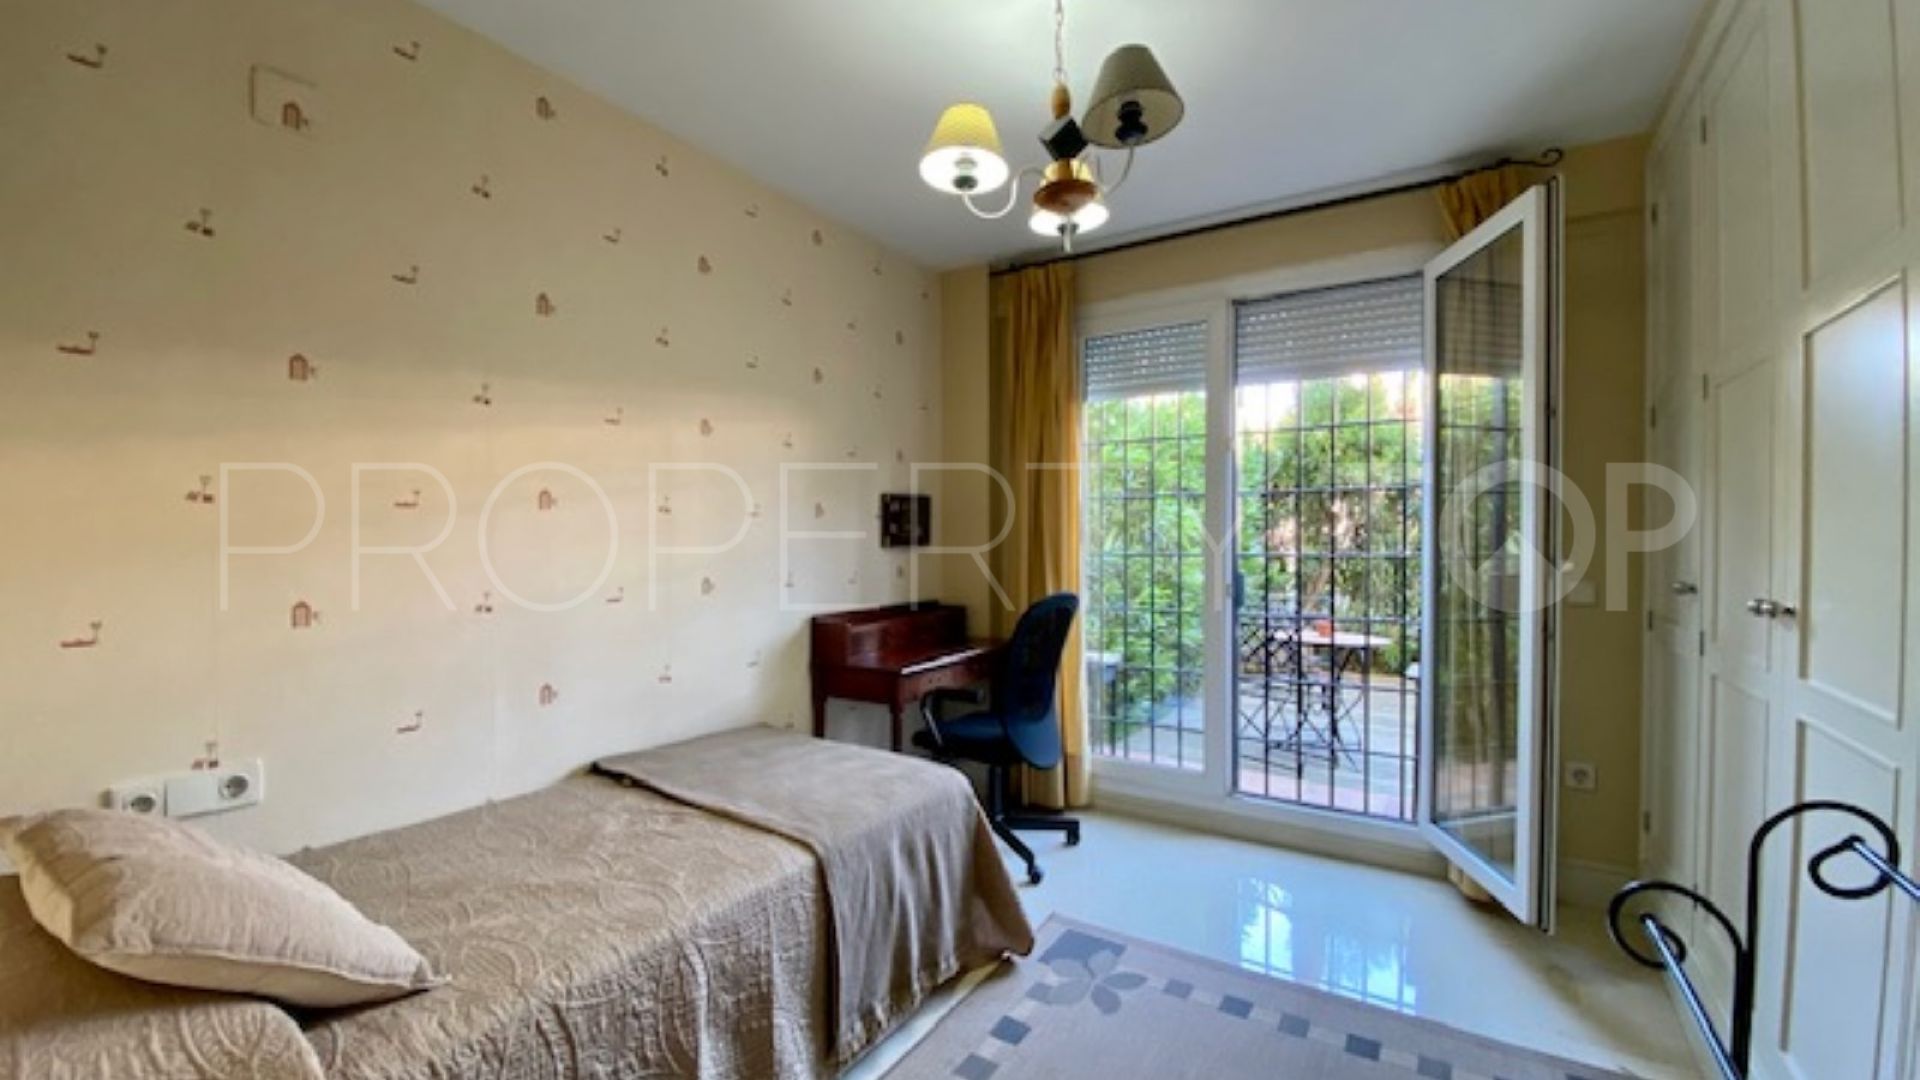 Ground floor apartment with 3 bedrooms for sale in Las Cañas